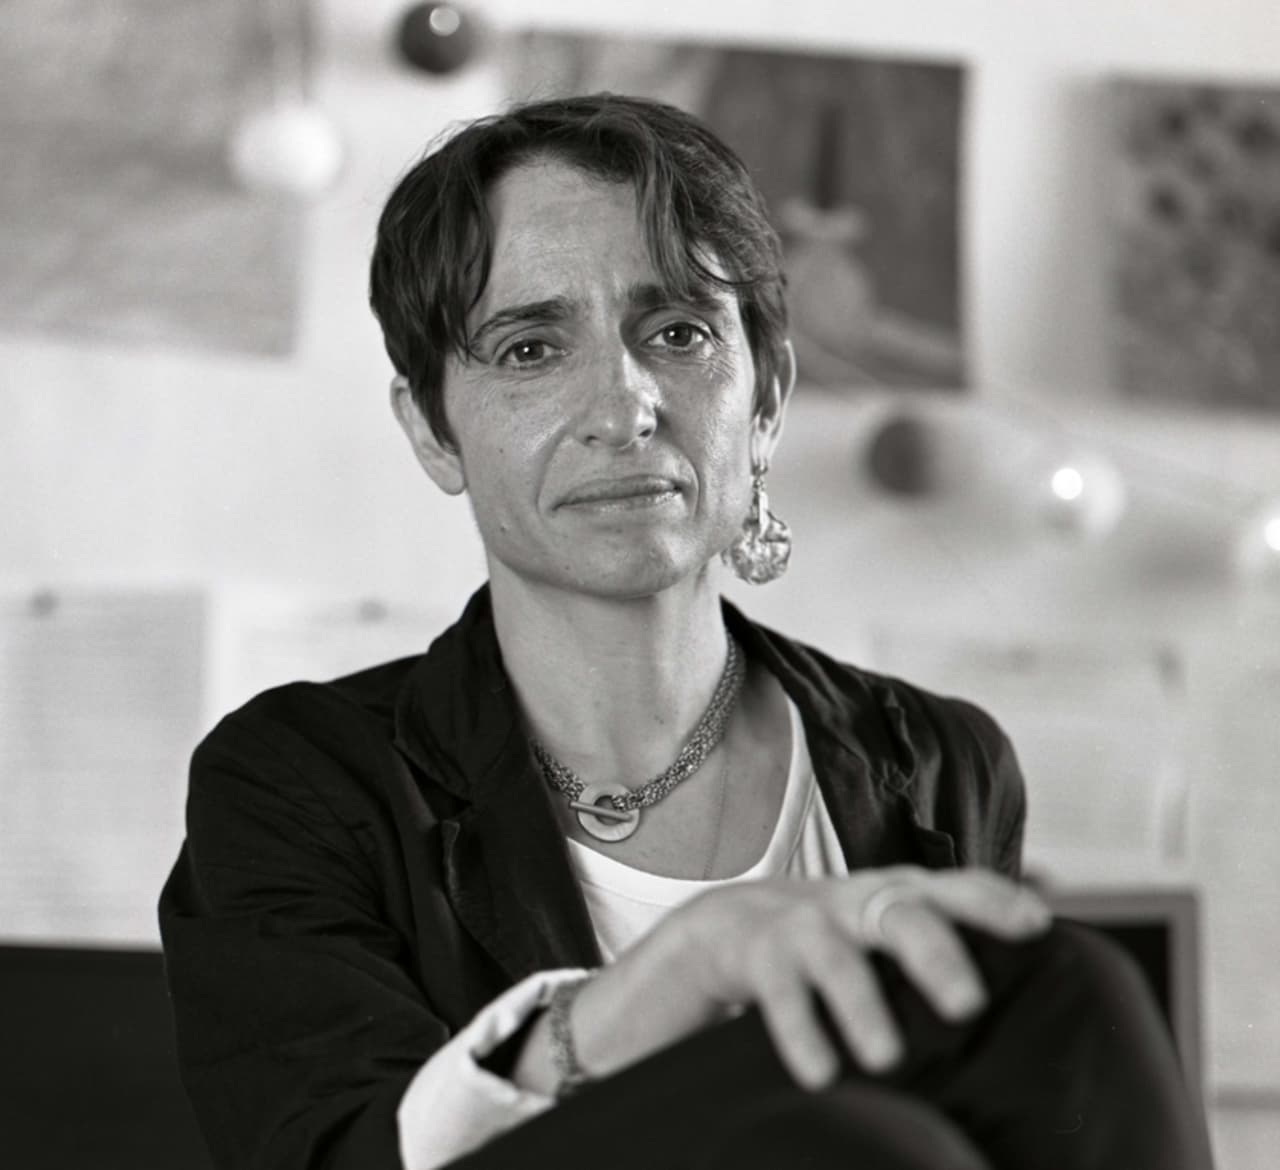 Masha Gessen, a journalist noted for her opposition to Russian President Vladimir Putin and writing about LGBT rights, will be speaking at SUNY Purchase on Wednesday, Nov. 5.